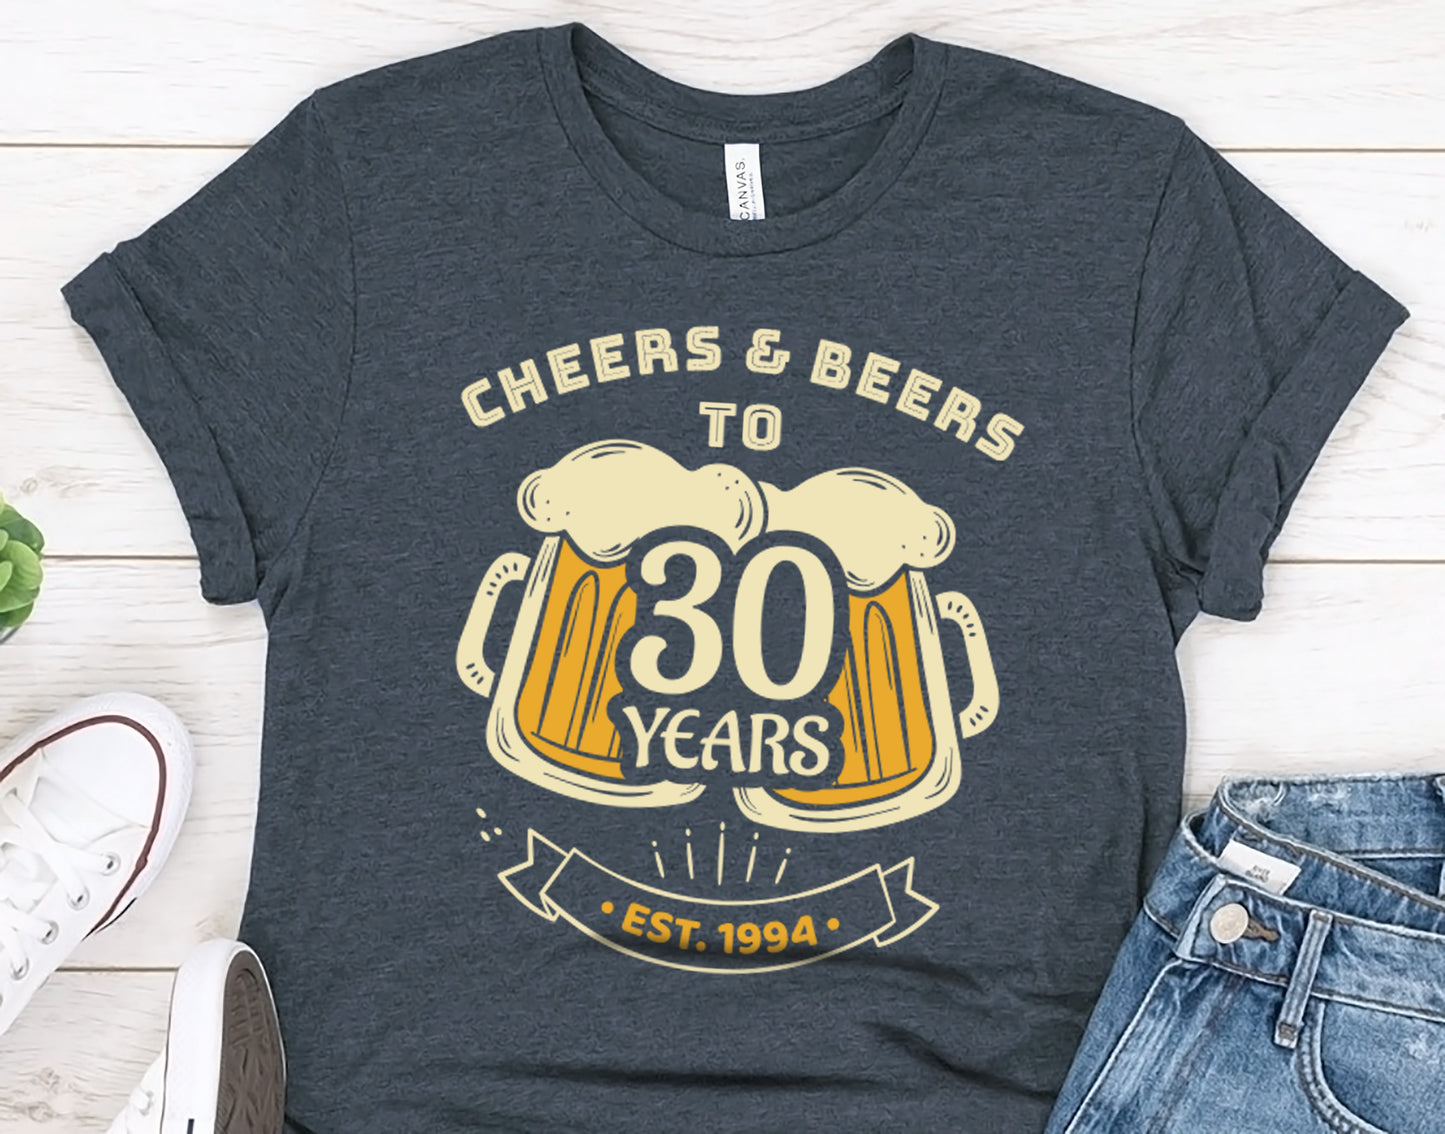 Cheers and Beers to 30 Years, 30th Birthday Gift Shirt for Men or Women